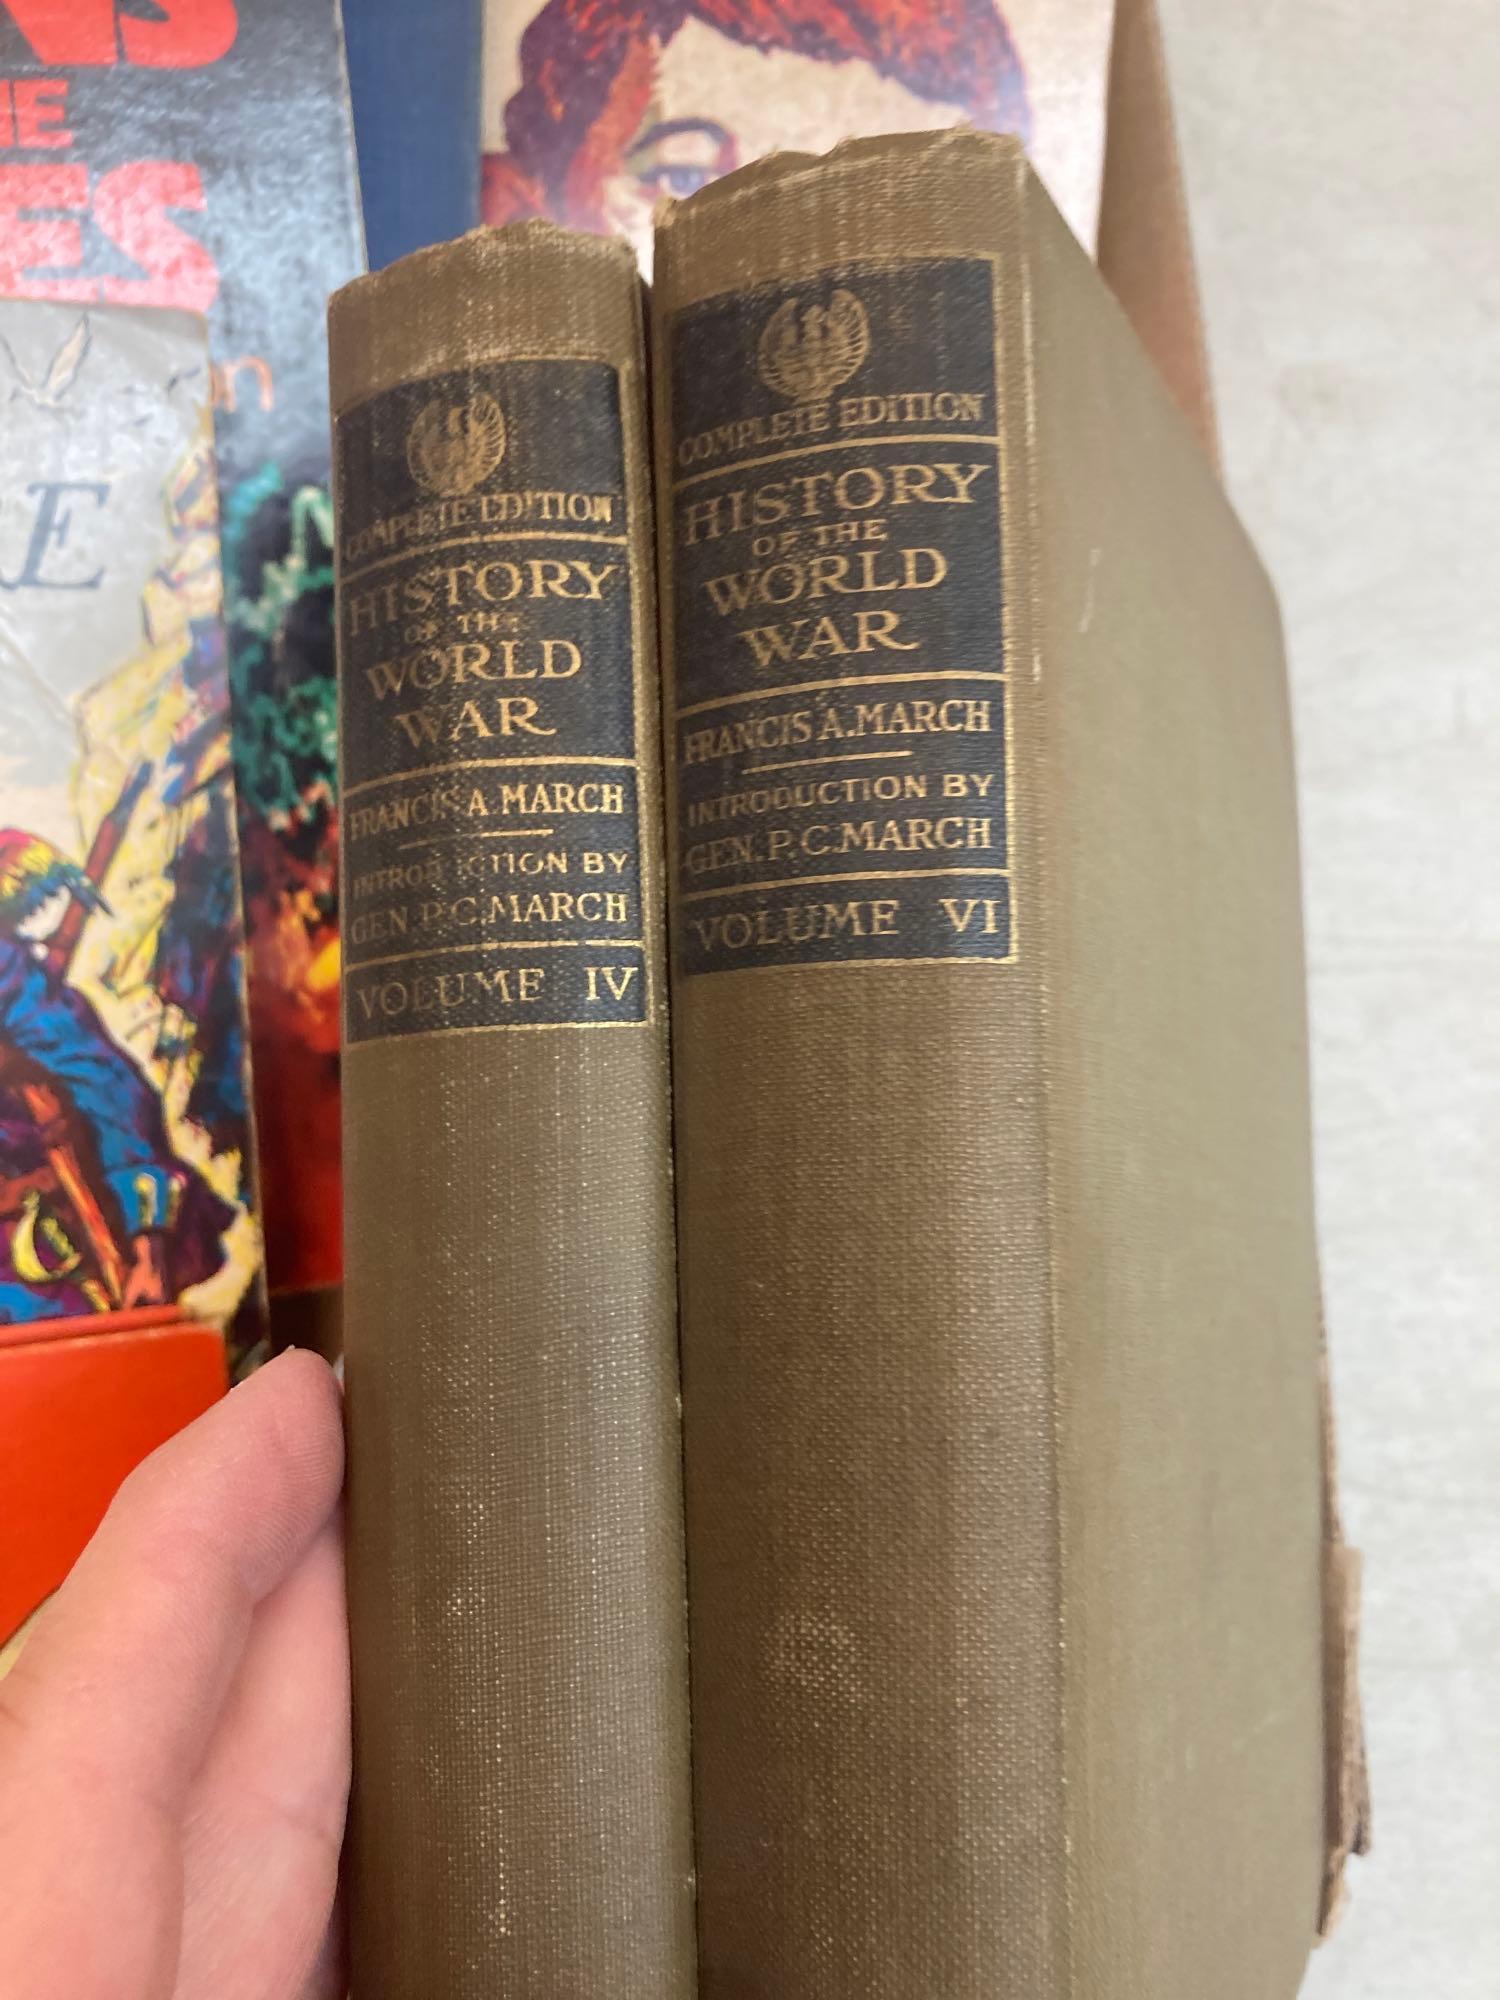 Vintage books, atlas, How and why book